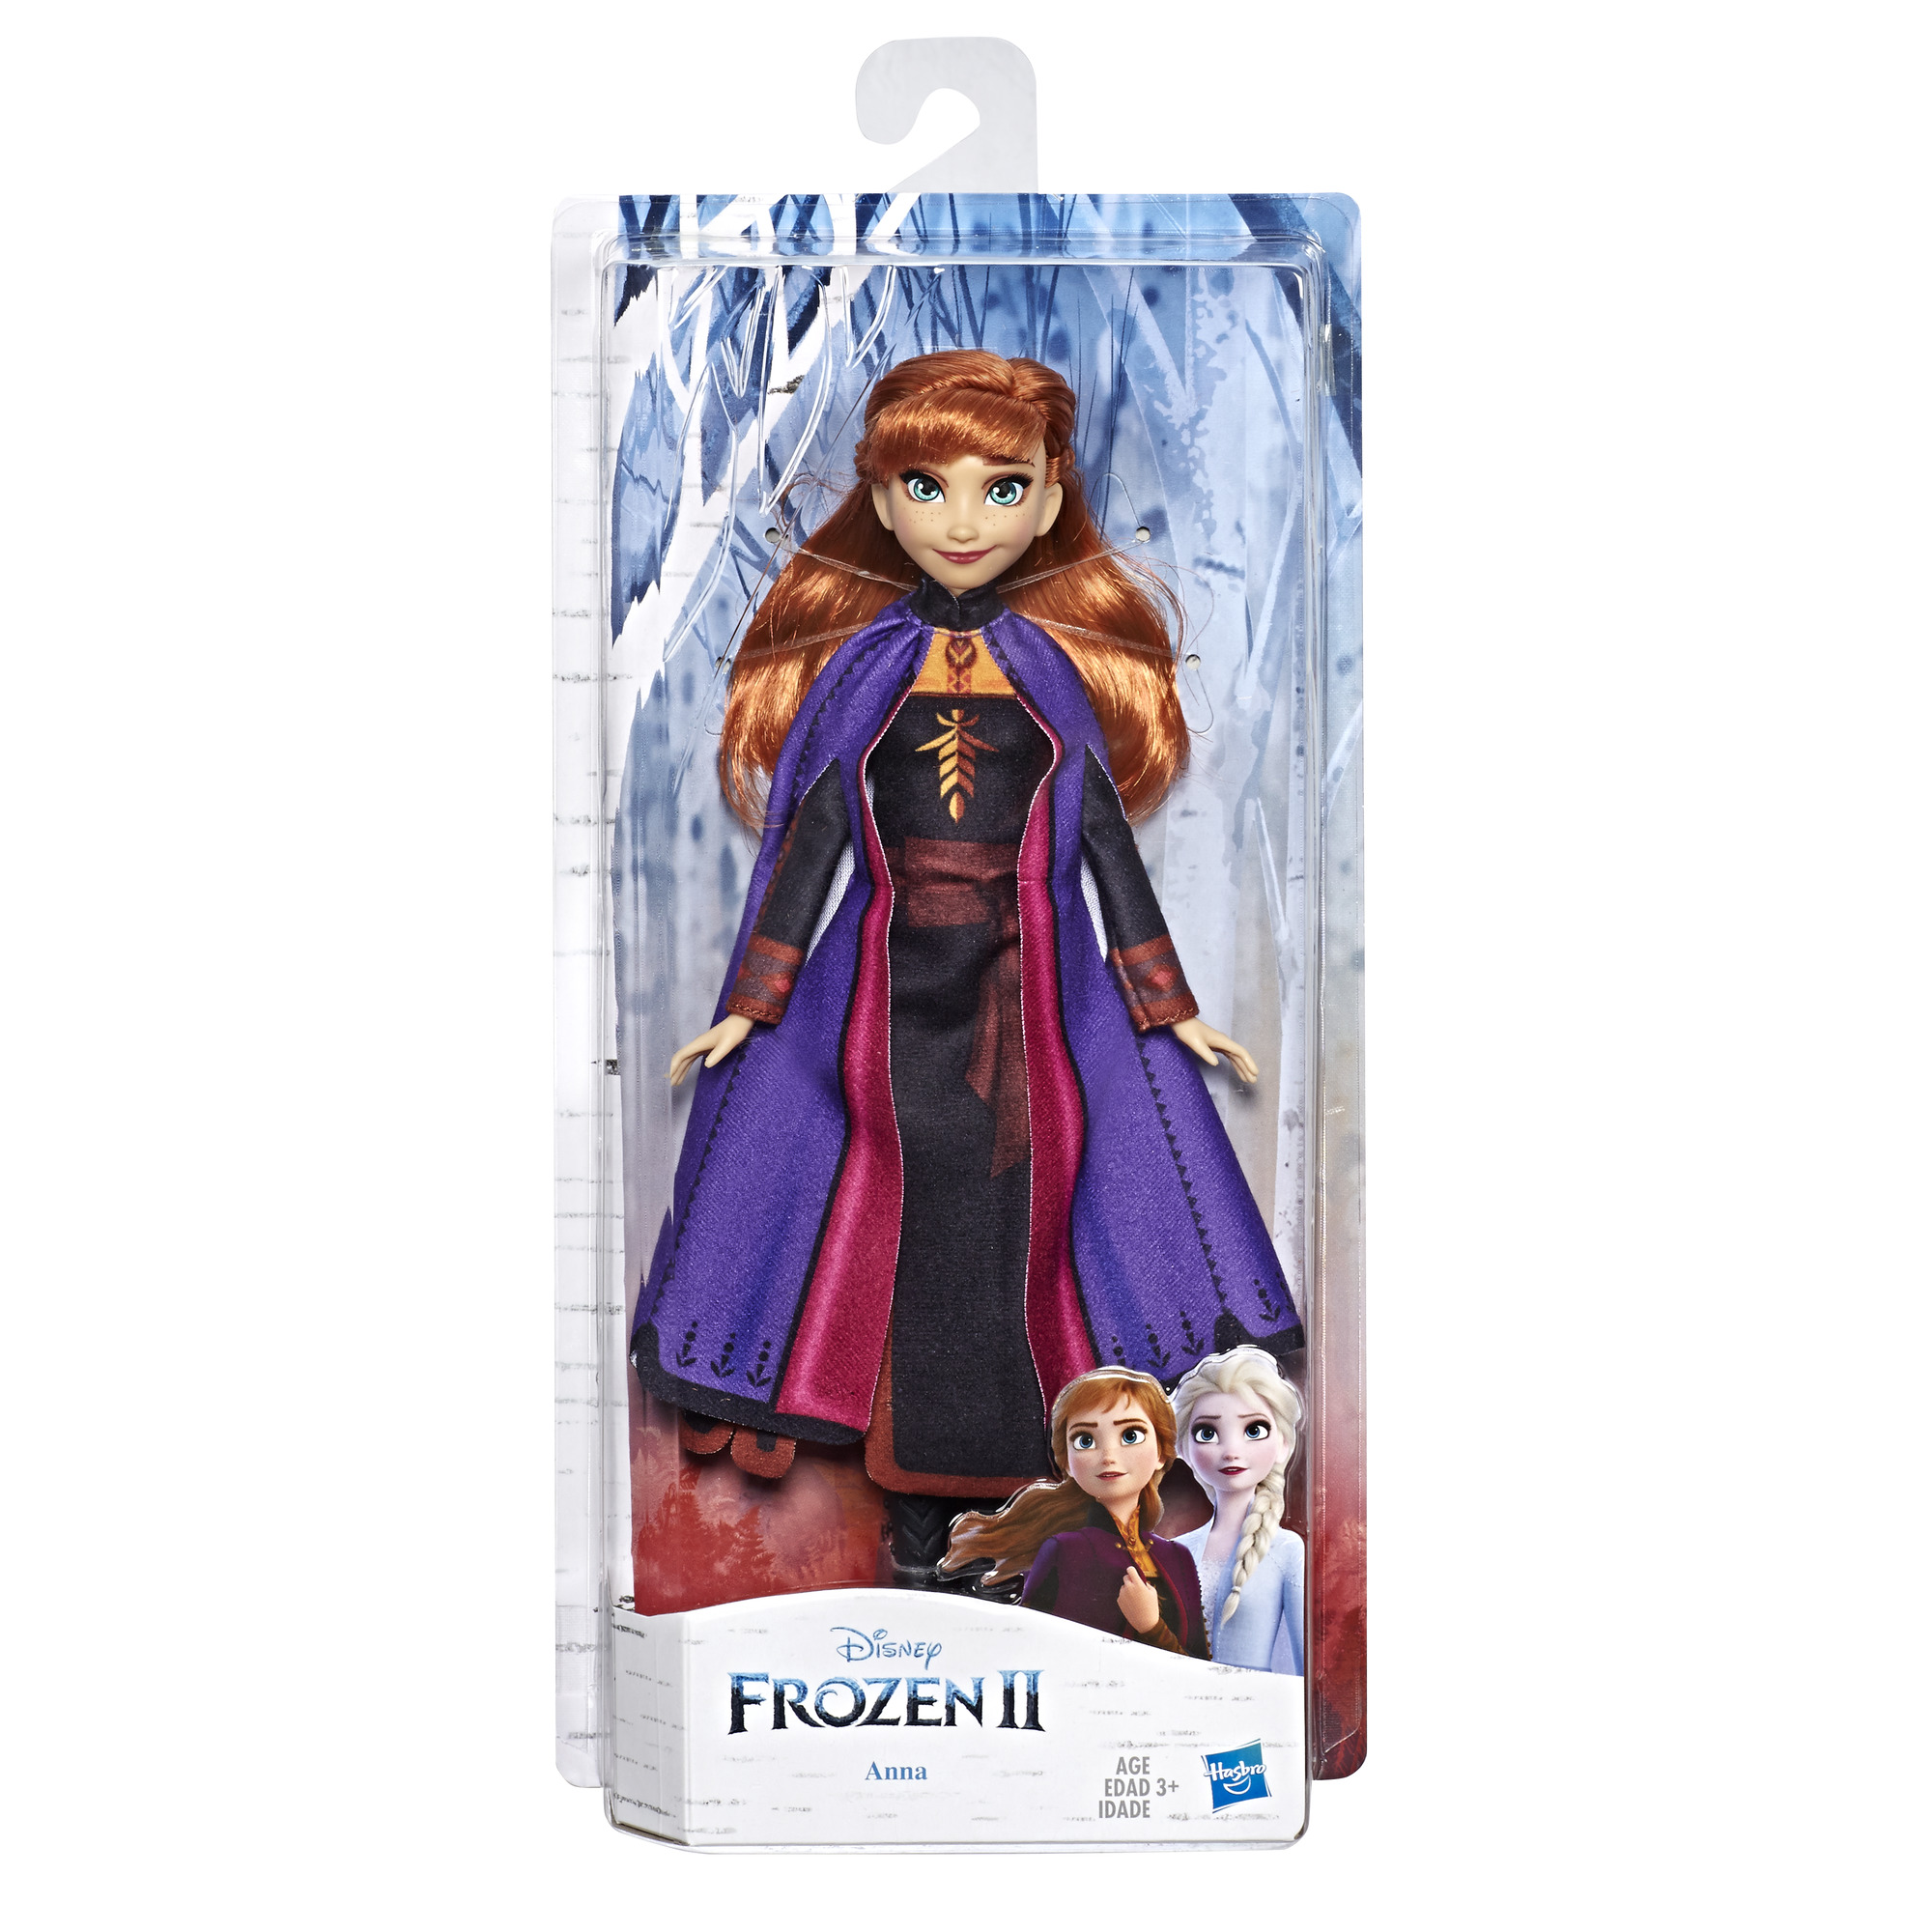 Disney Frozen Anna Fashion Doll With Long Red Hair and Outfit Inspired by Frozen 2 - image 2 of 3